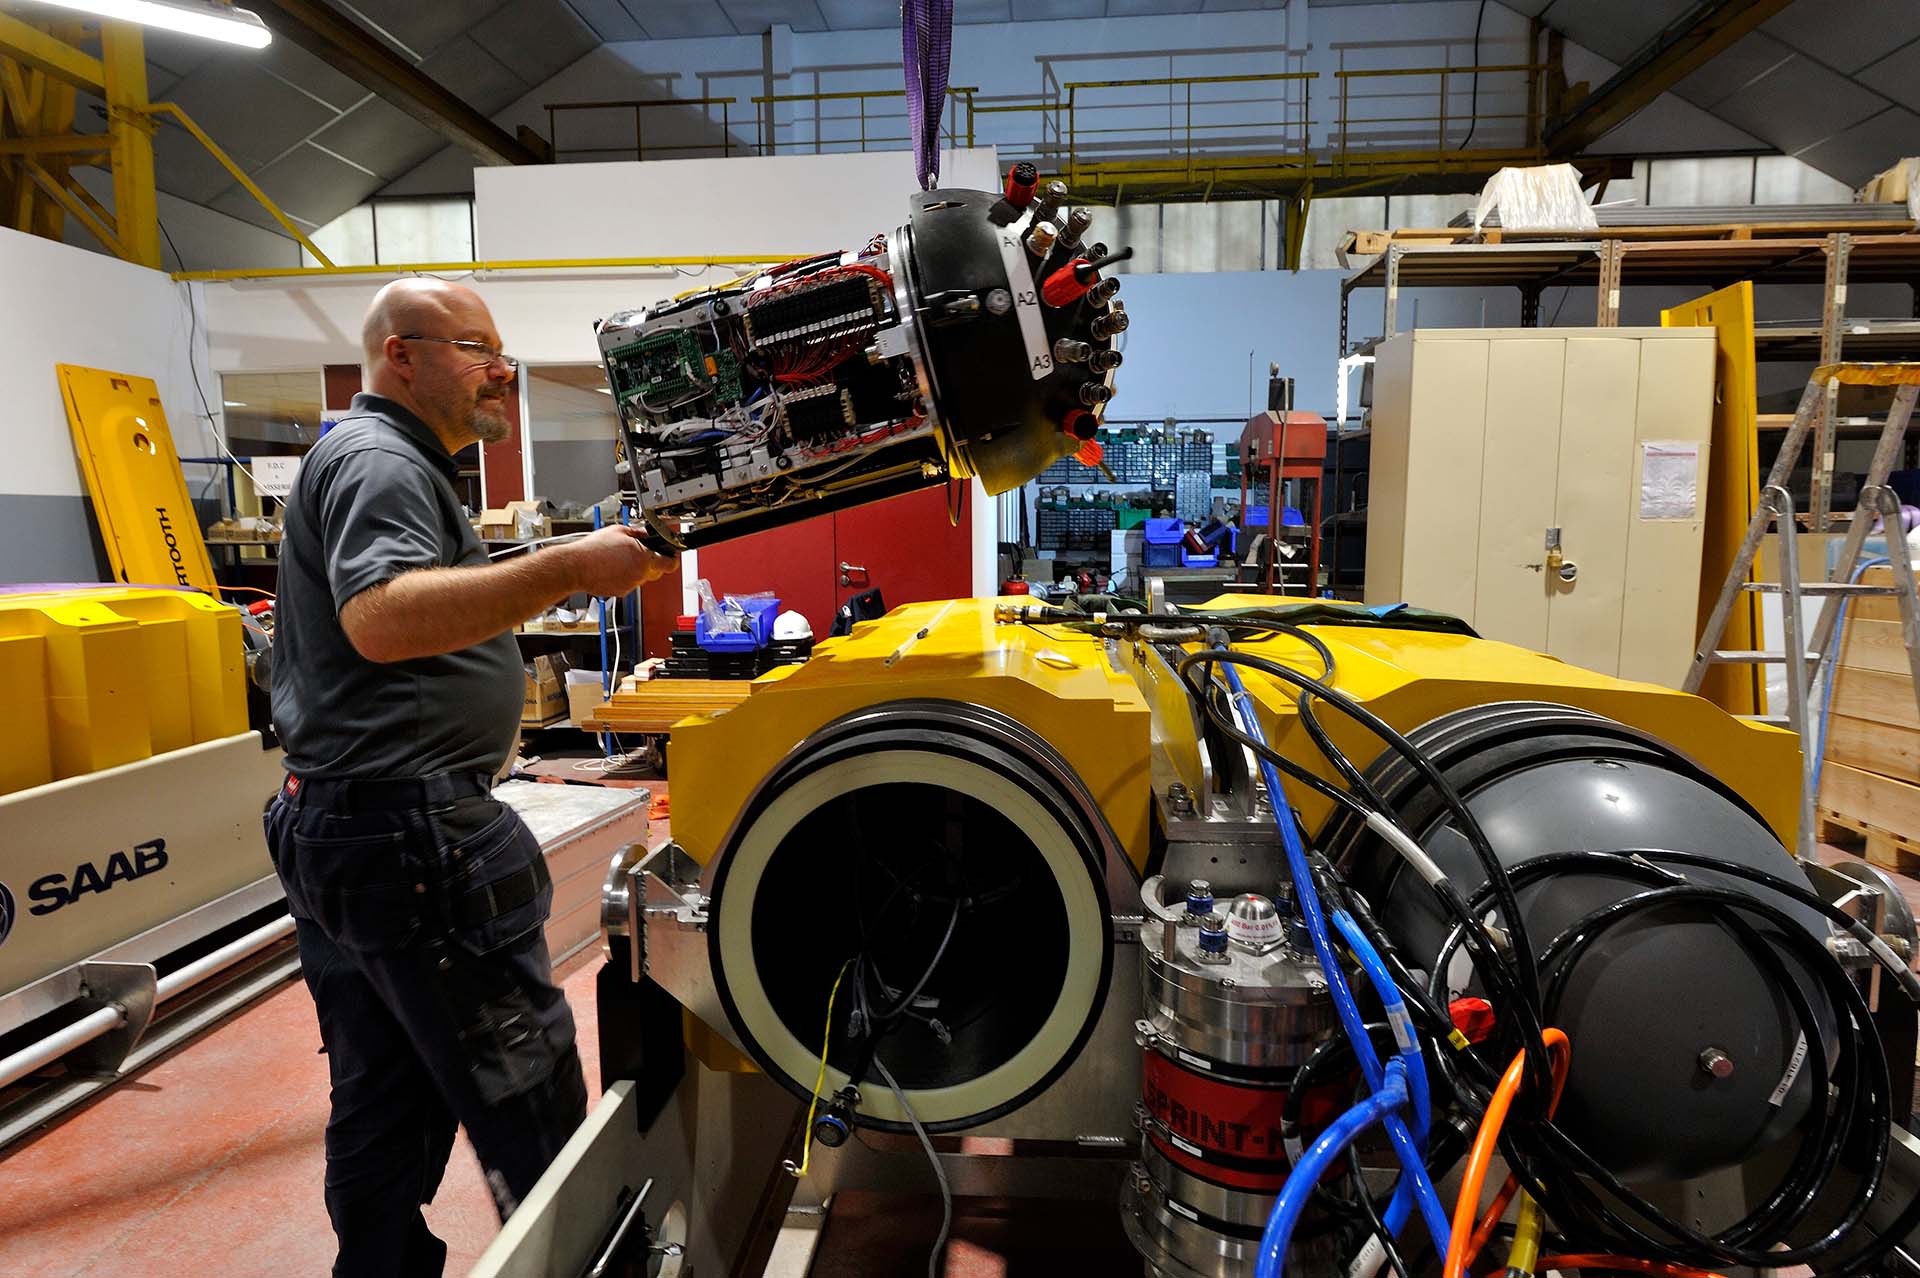 An engineer works on the SAAB Sabertooth AUV for Endurance22 cold water trials in Nov 2021.